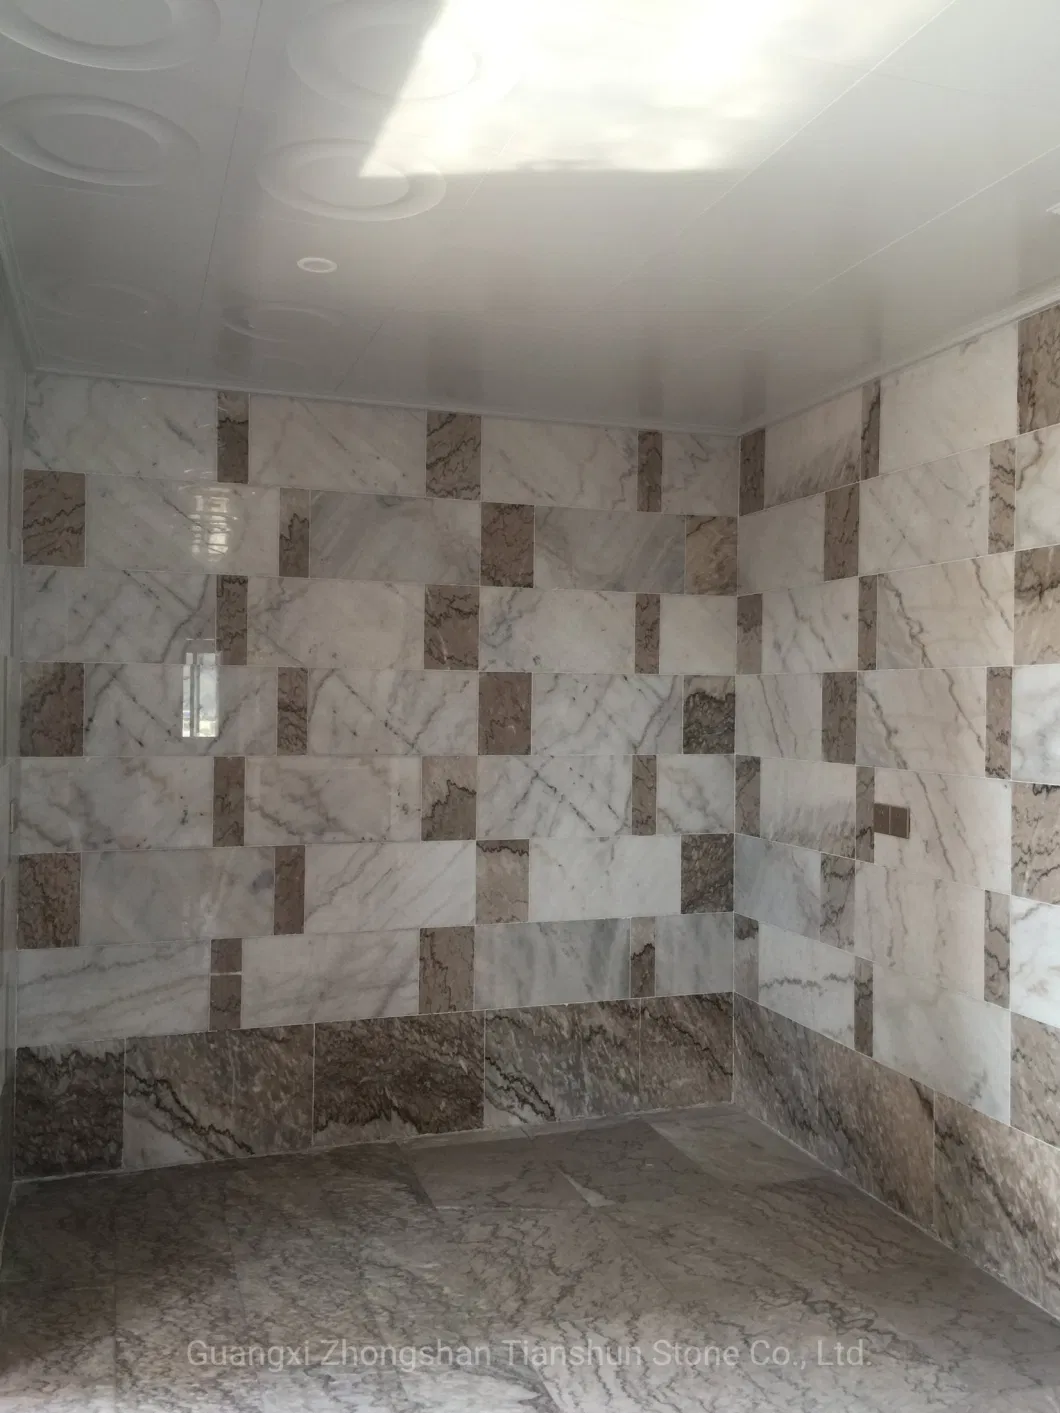 900X900 Square Marble Tiles China Wholesale Price